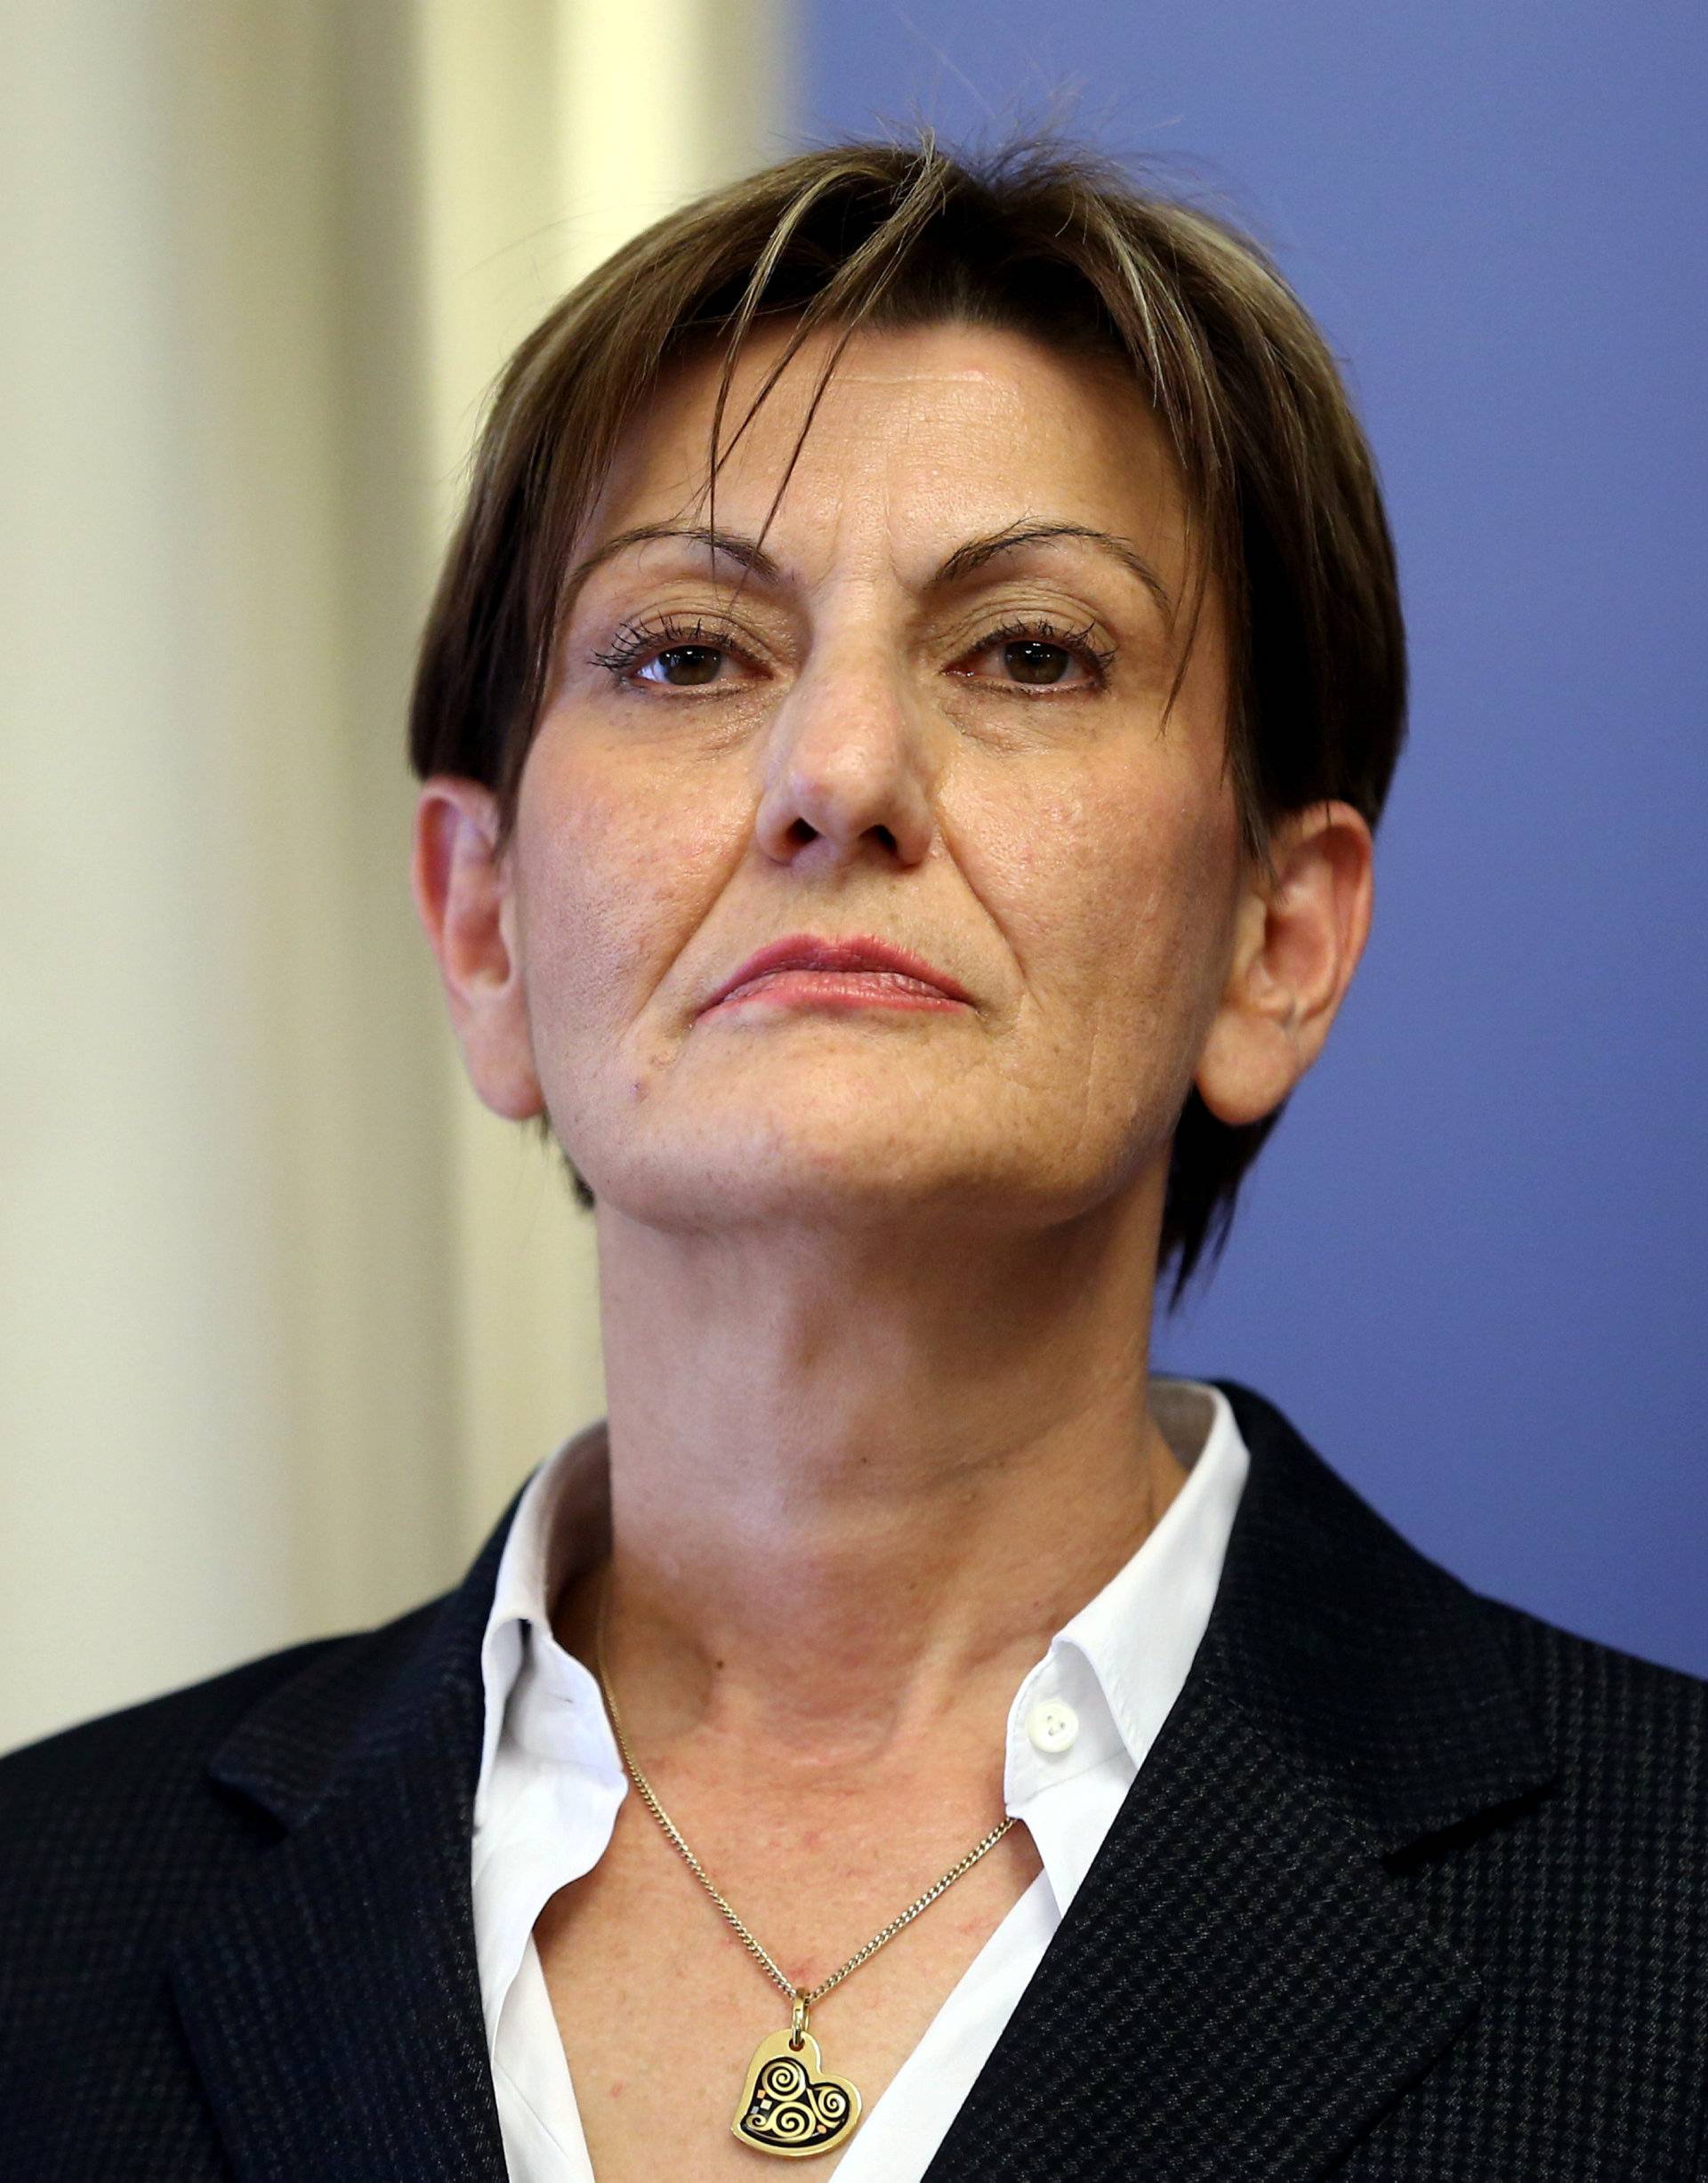 FILE PHOTO: Martina Dalic, Minister of Economy, attends a news conference in a government building in Zagreb